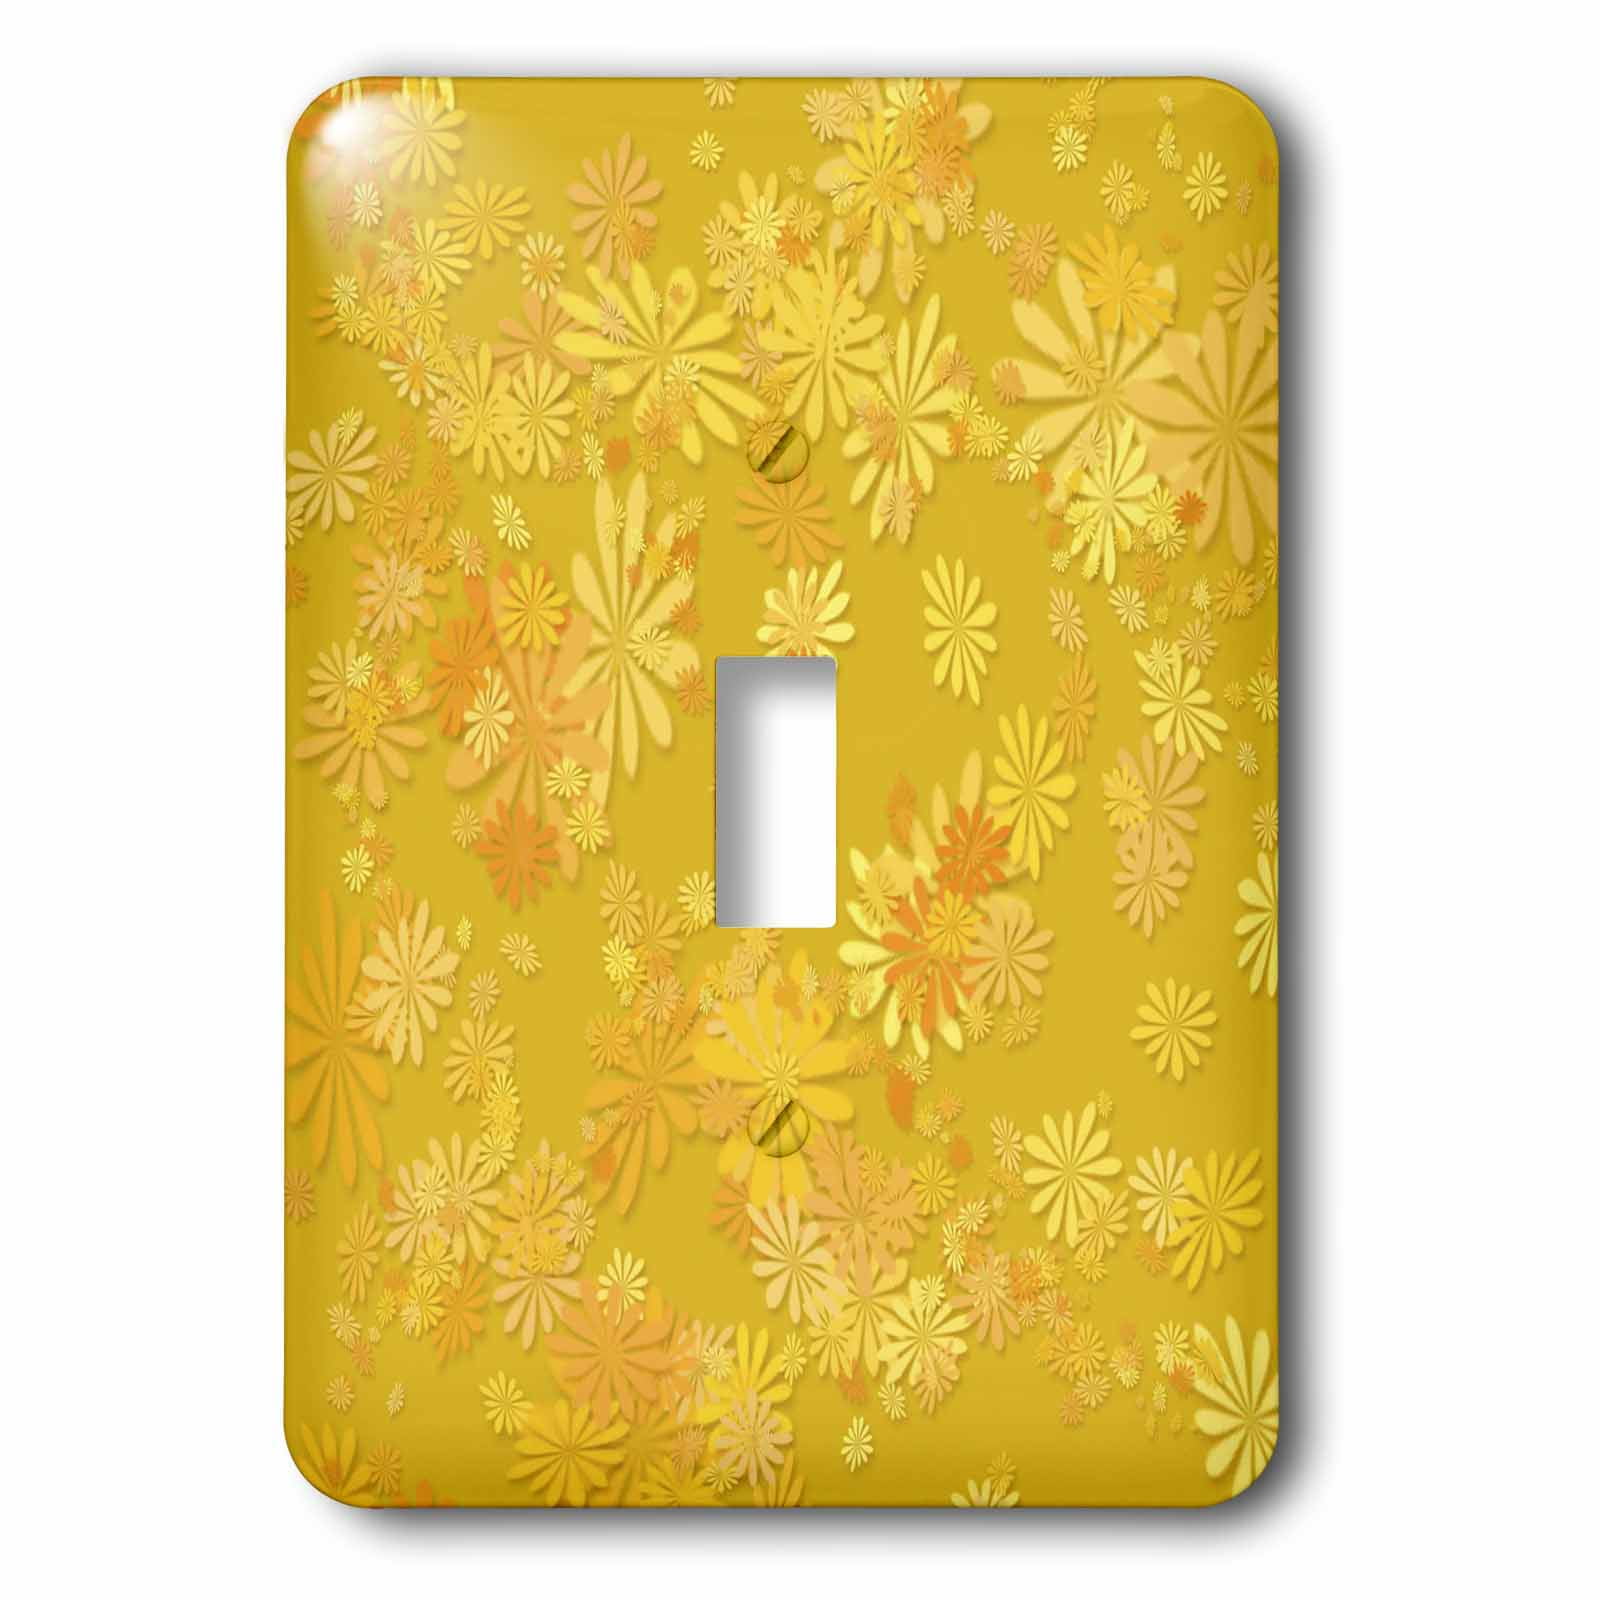 Gold 3dRose lsp_38563_1 Fanciful Whimsical Array of Various Flowers in Shades Of Single Toggle Switch 